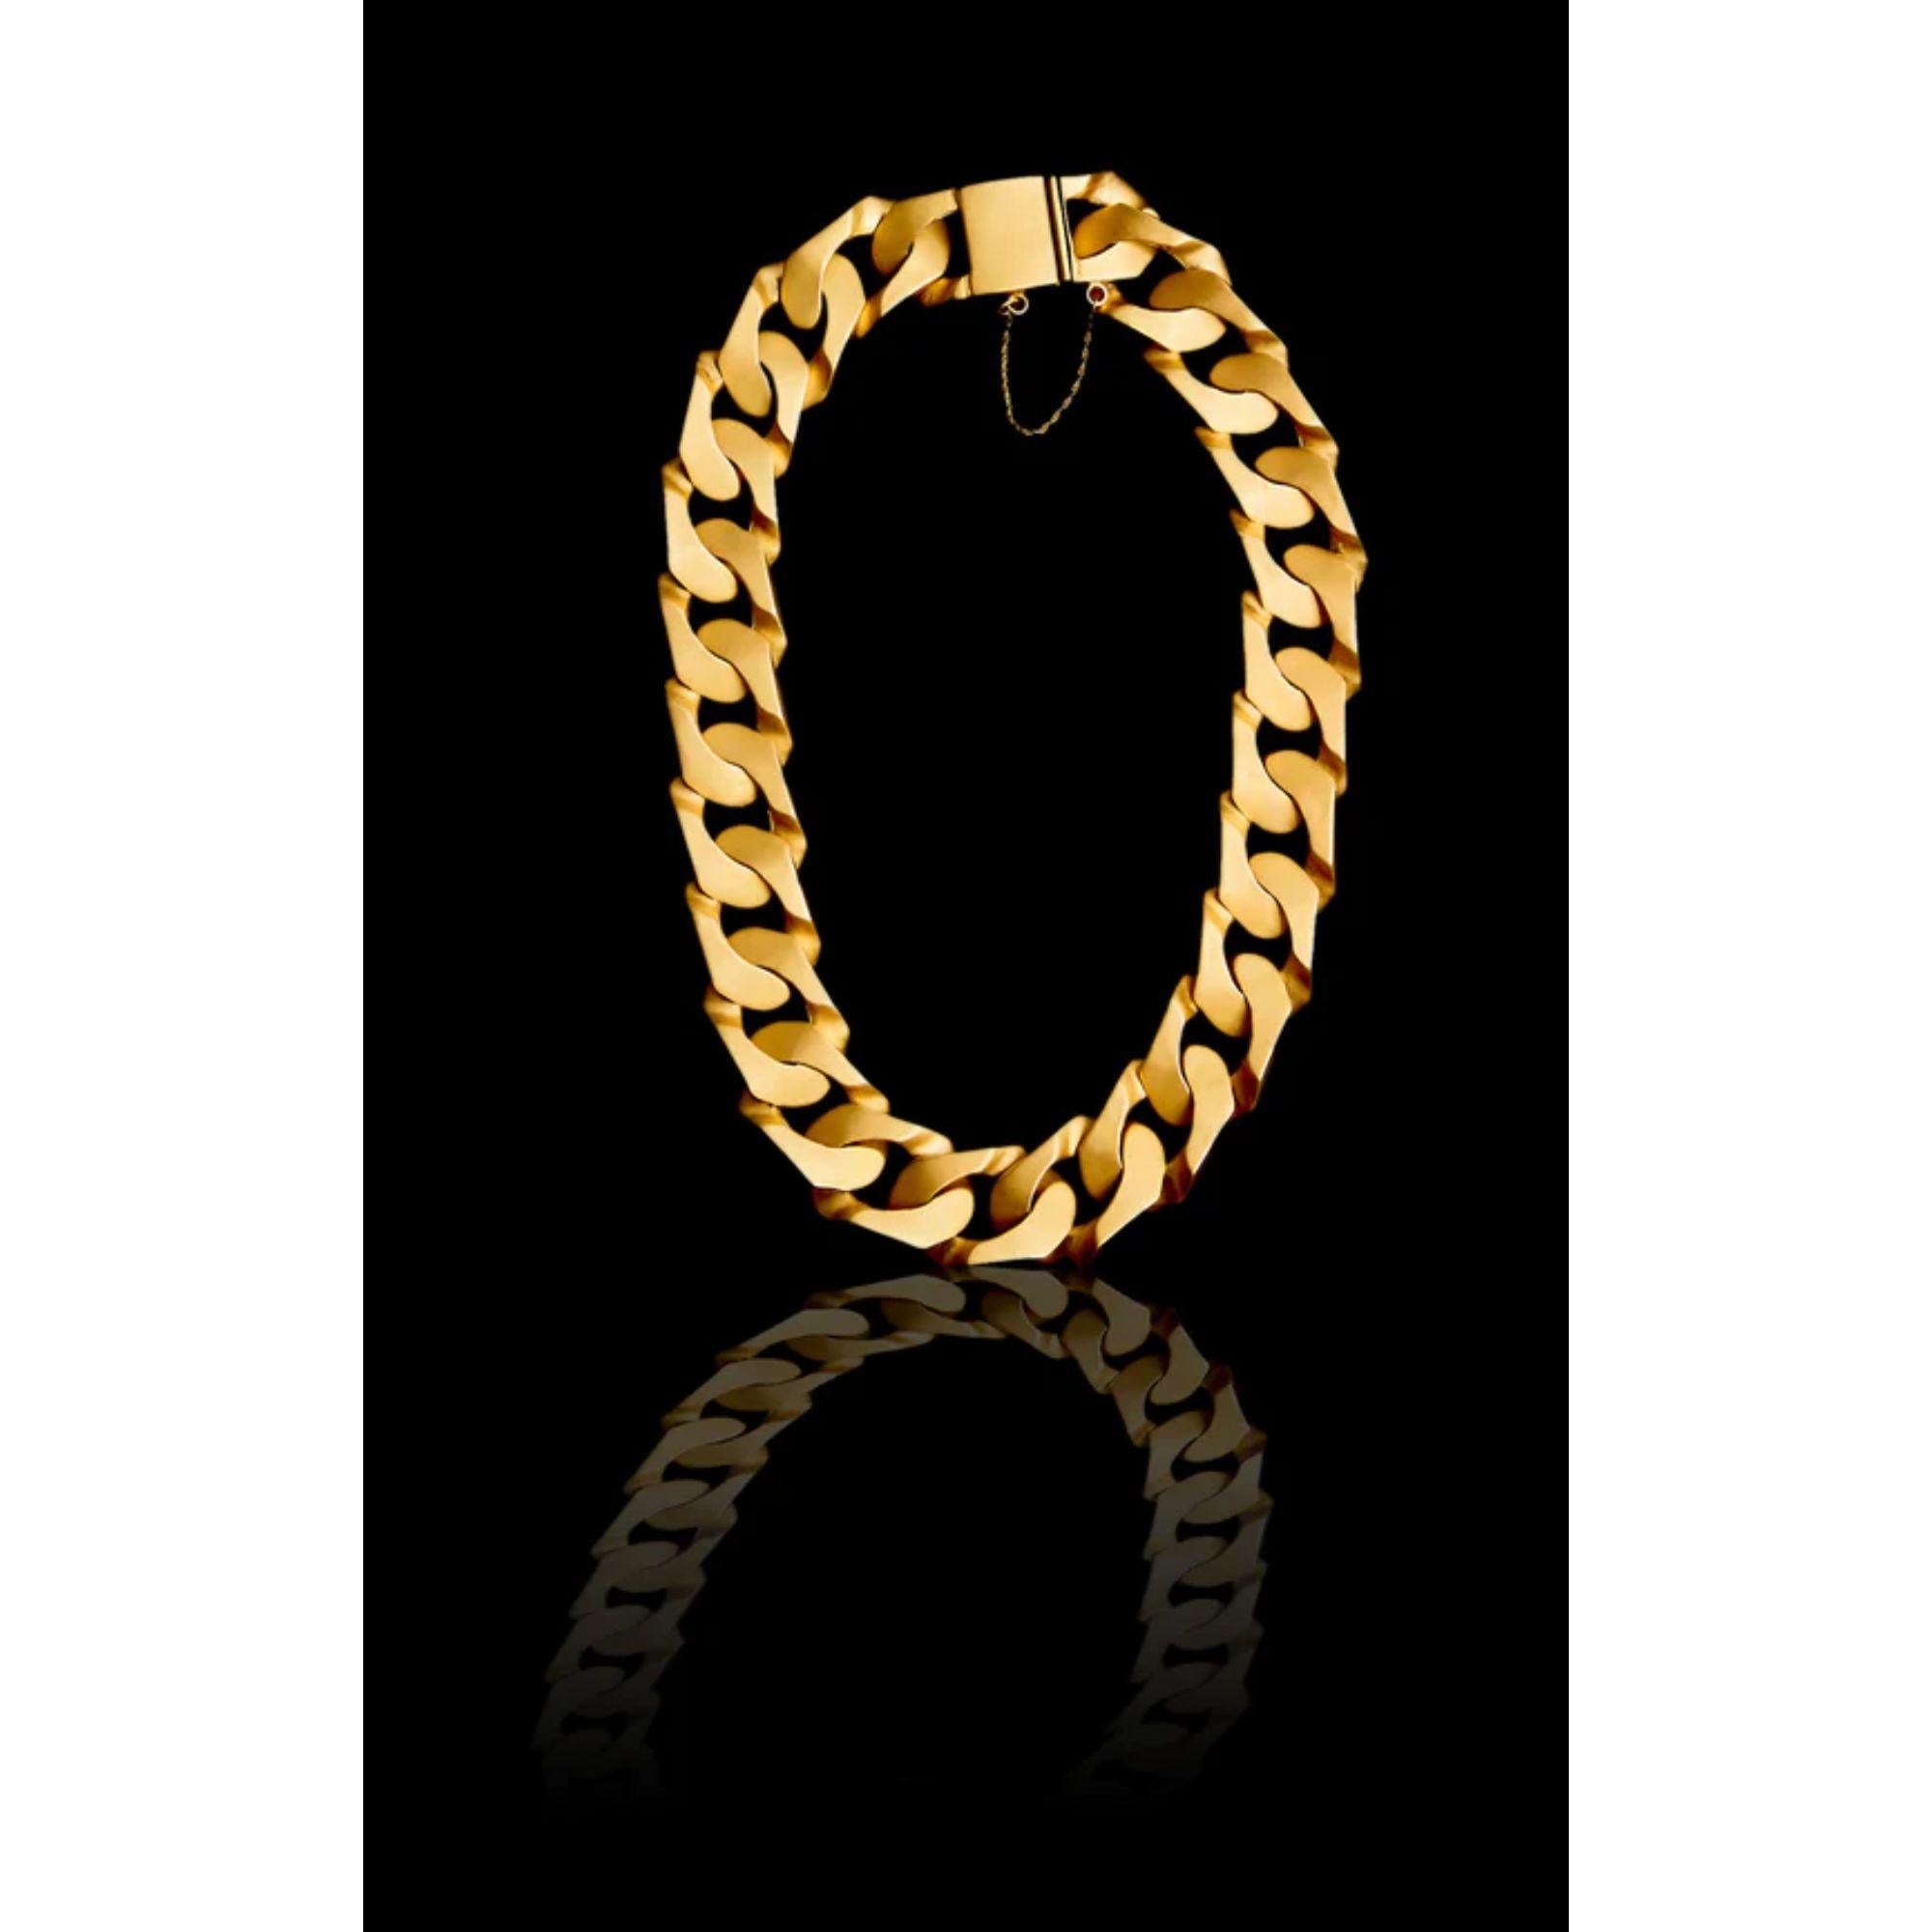 A sexy, substantial Cuban chain necklace to take you from day to night, all handmade. This iconic, statement, classic jewel has been made oversize and includes a safety chain so you will never lose it! Select your gold finish and the cuff that